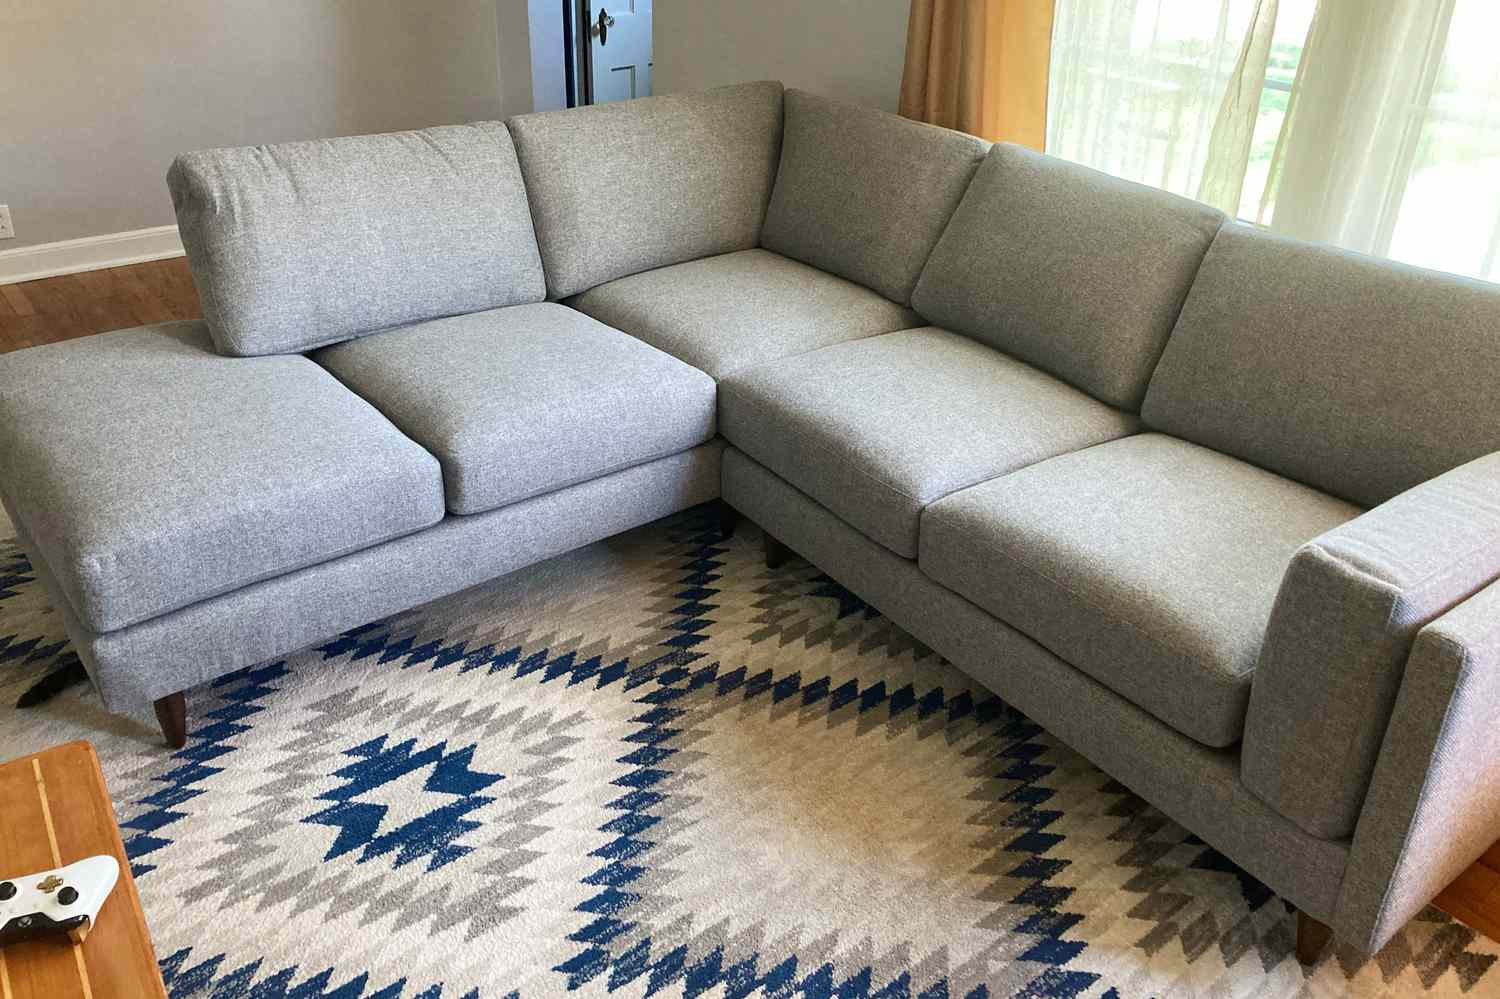 The BenchMade Modern Skinny Fat Sectional With Bumper set up in a living room